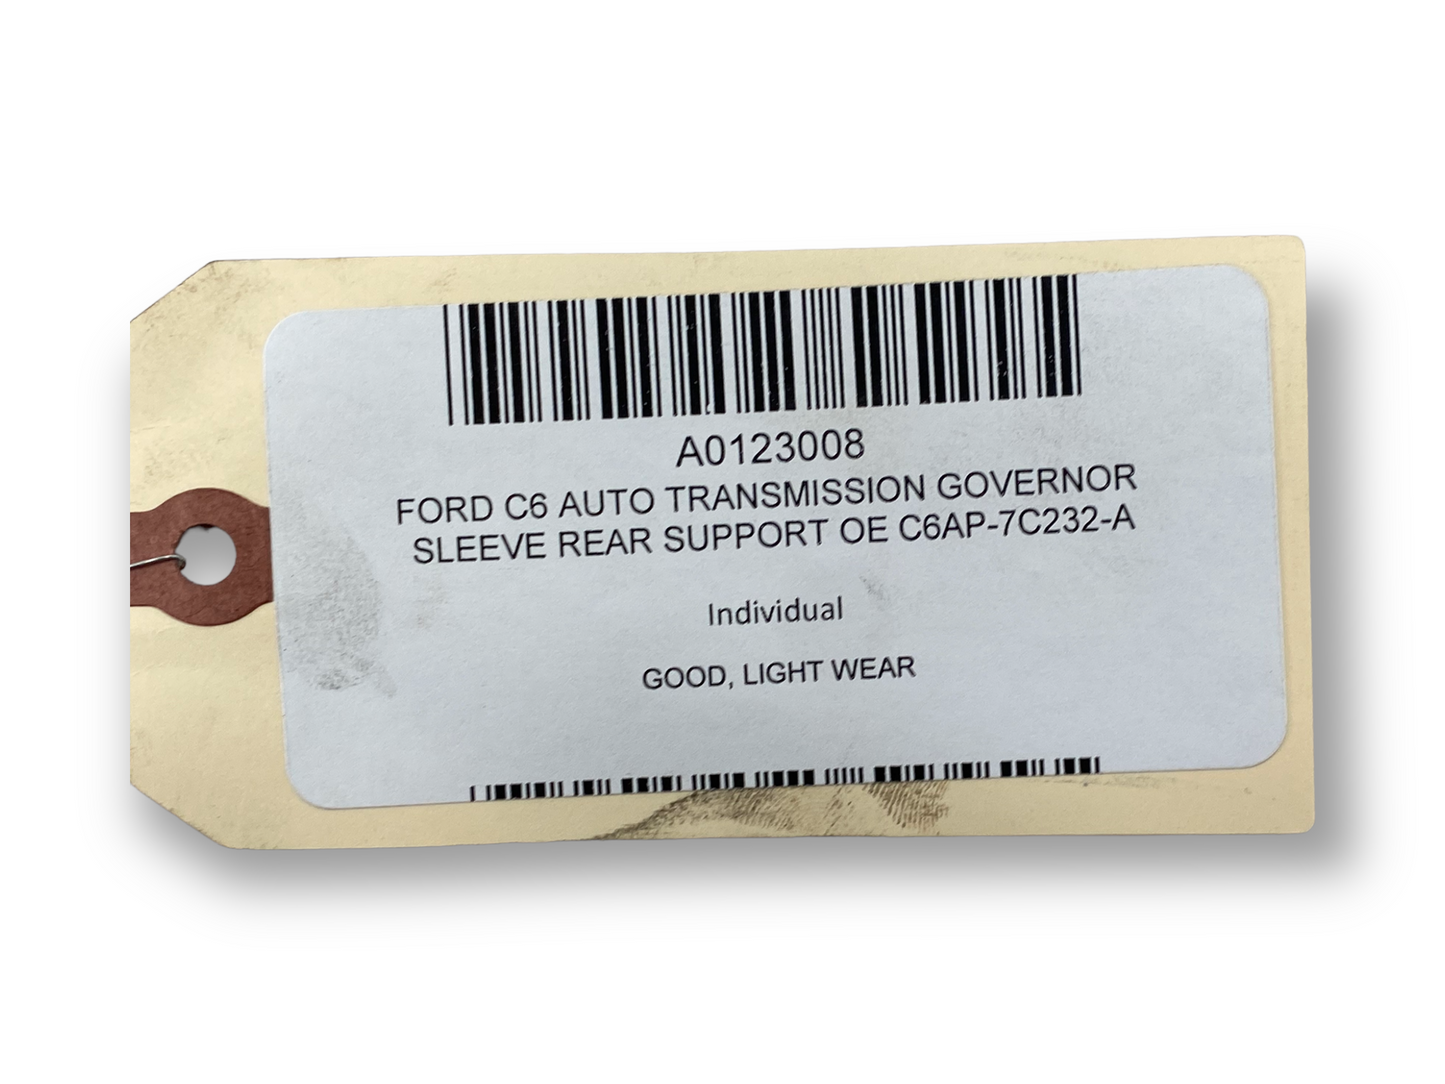 Ford C6 Auto Transmission Governor Sleeve Rear Support OE C6AP-7C232-A